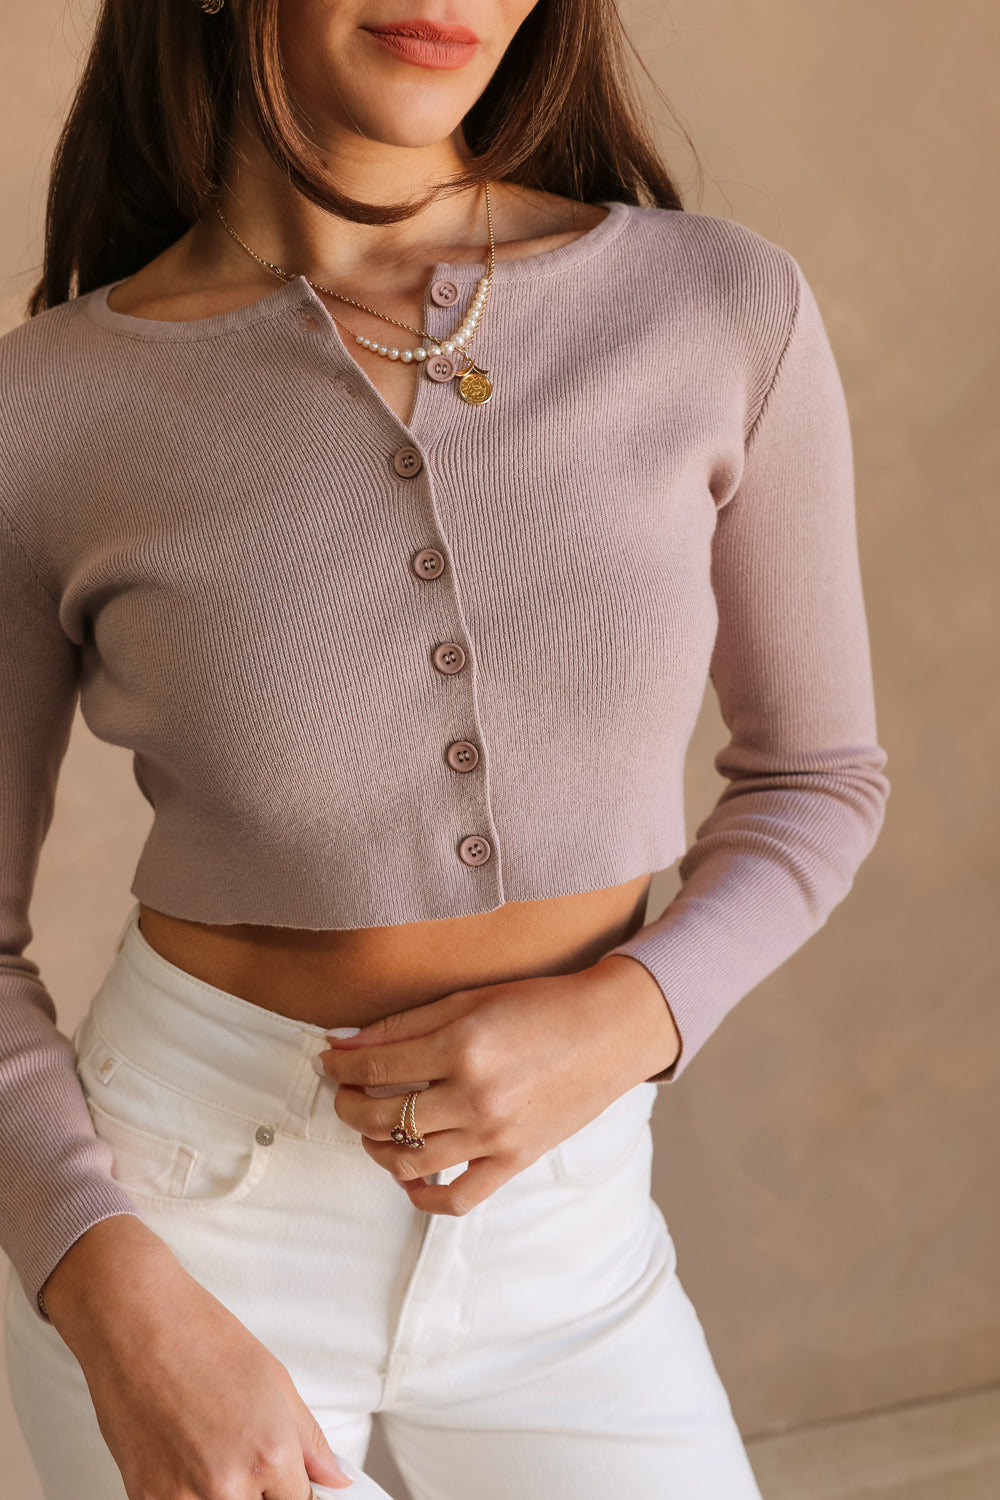 Close up view of female model wearing the Avery Lilac Button-Up Cropped Cardigan which features Lilac Cotton Knit Fabric, Cropped Waist, Monochrome Front Button Up Closure and Long Sleeves